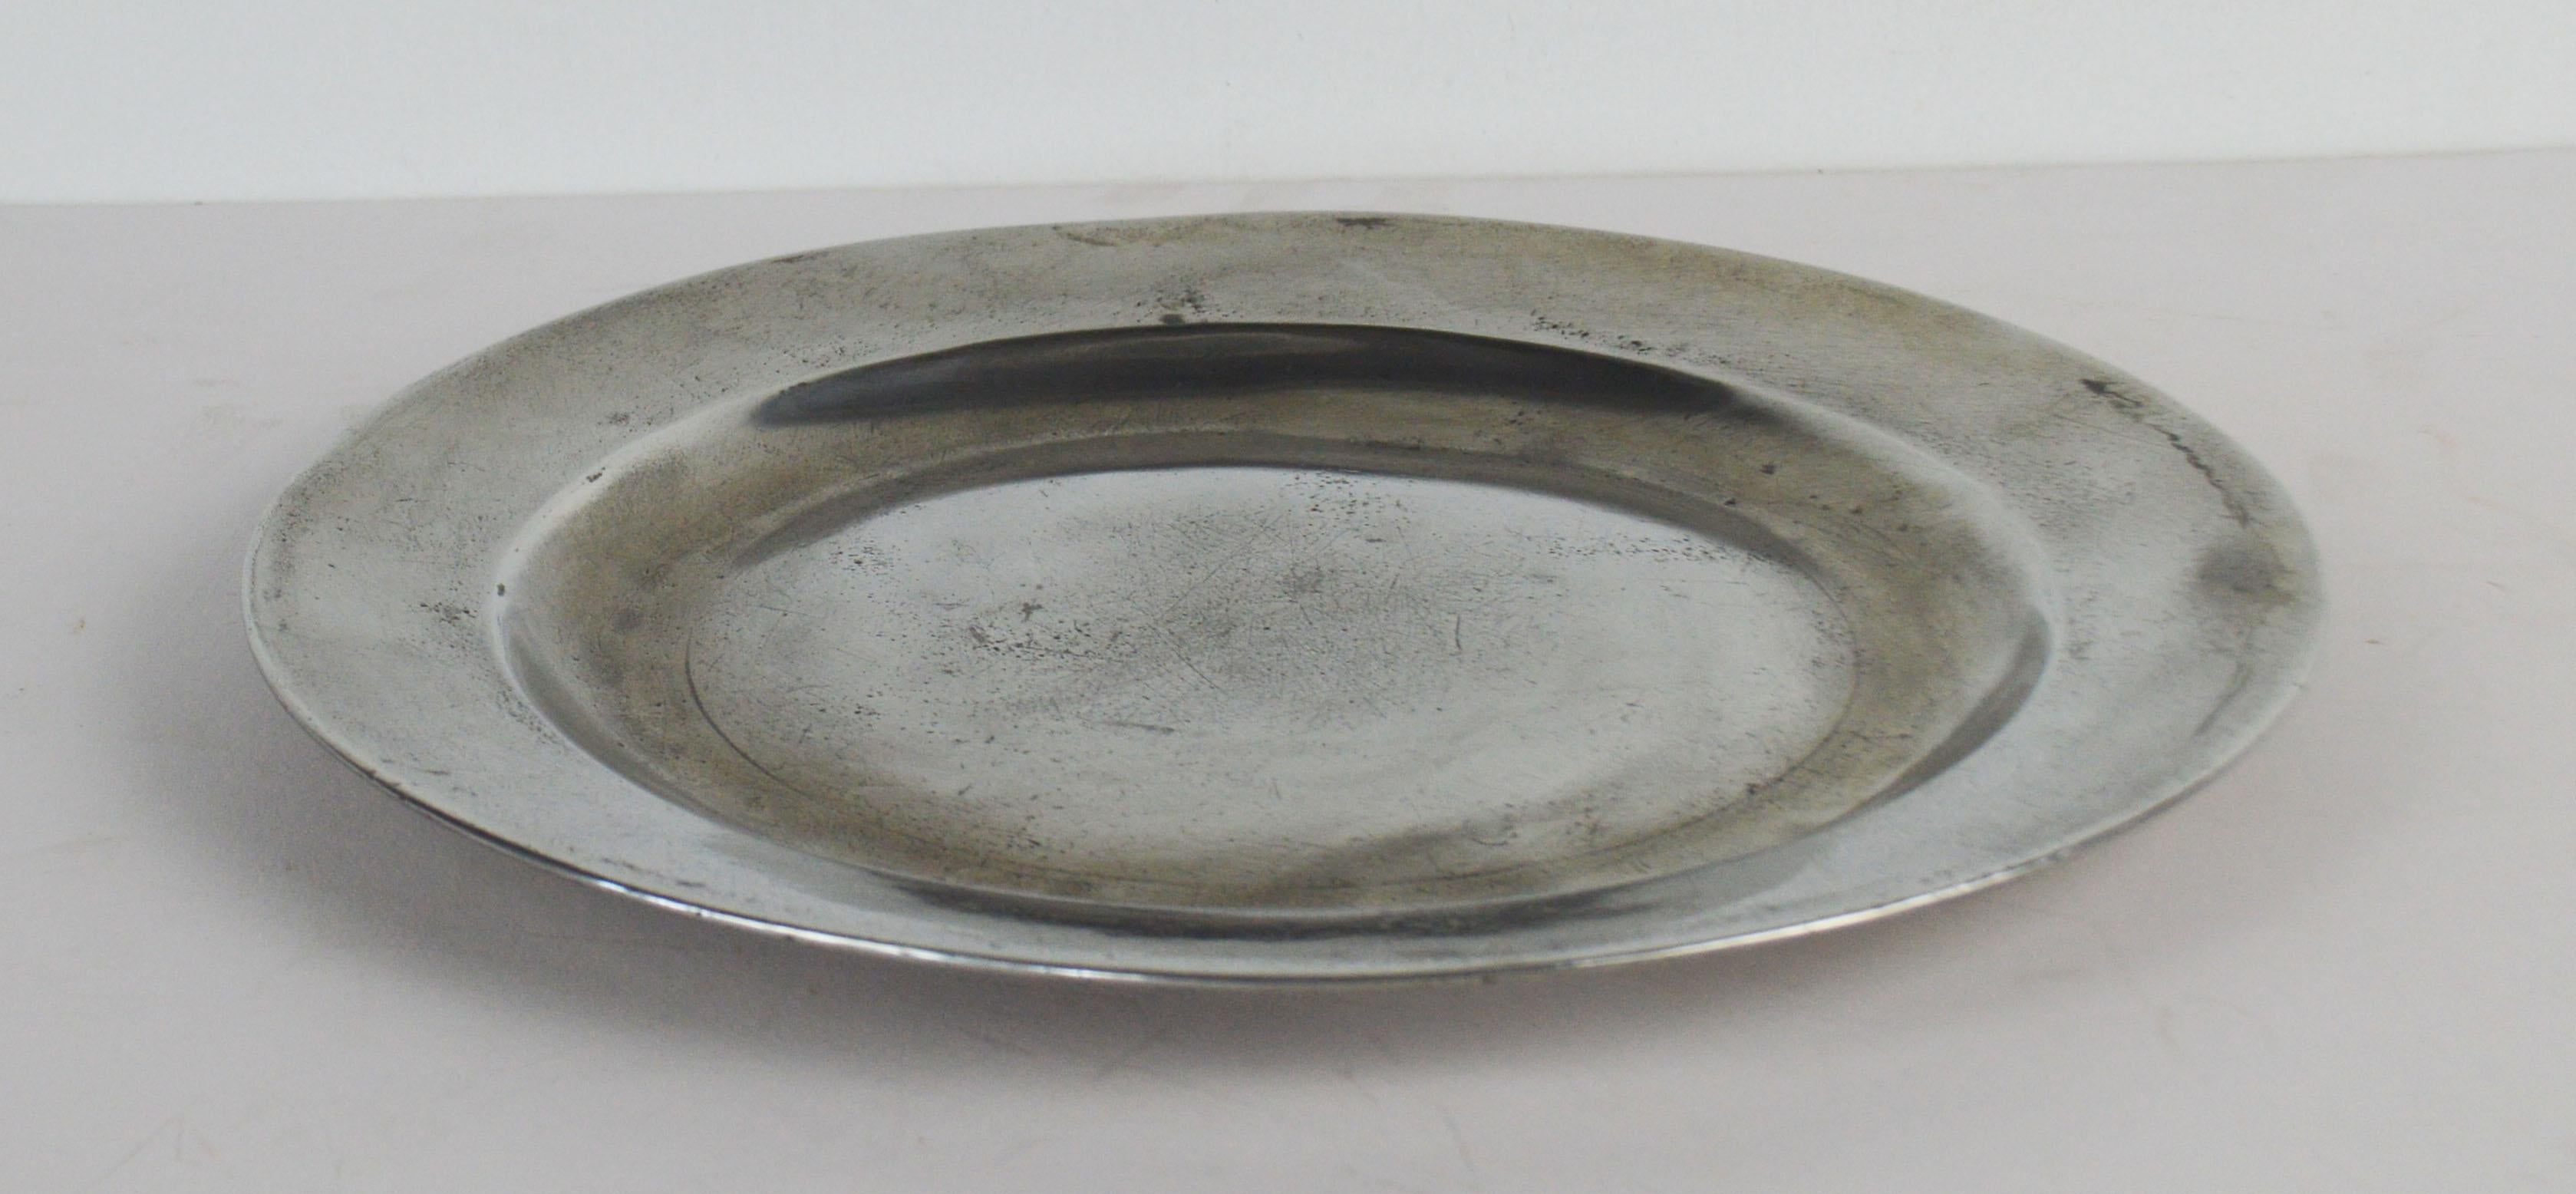 Pair of Antique Polished 9.5 inch Pewter Plates, English, 18th Century 2